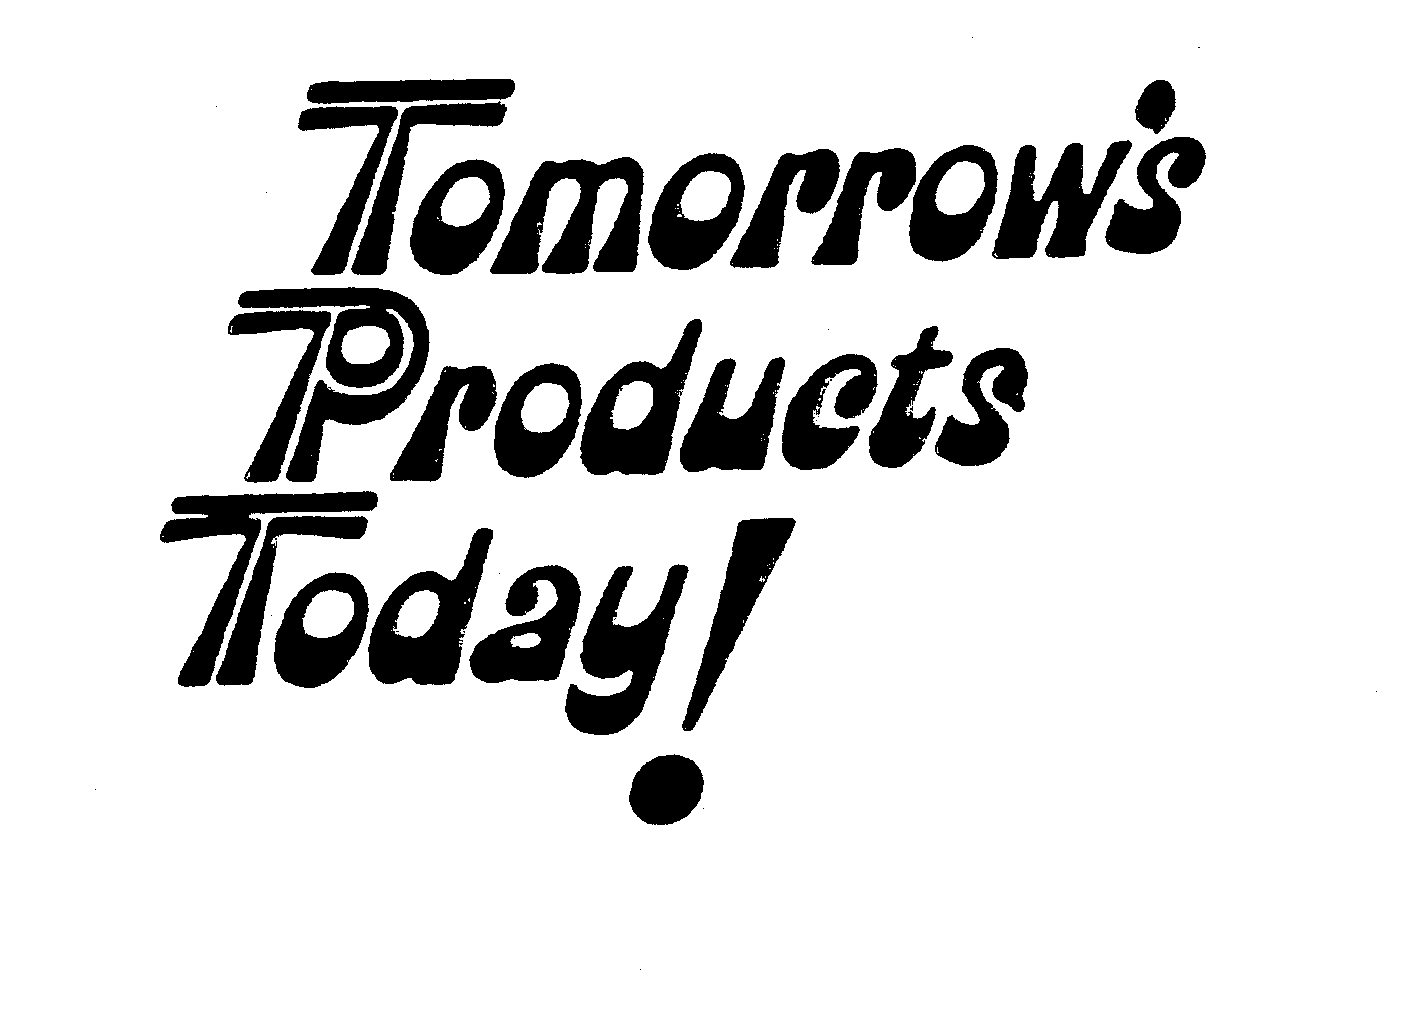  TOMORROW'S PRODUCTS TODAY!